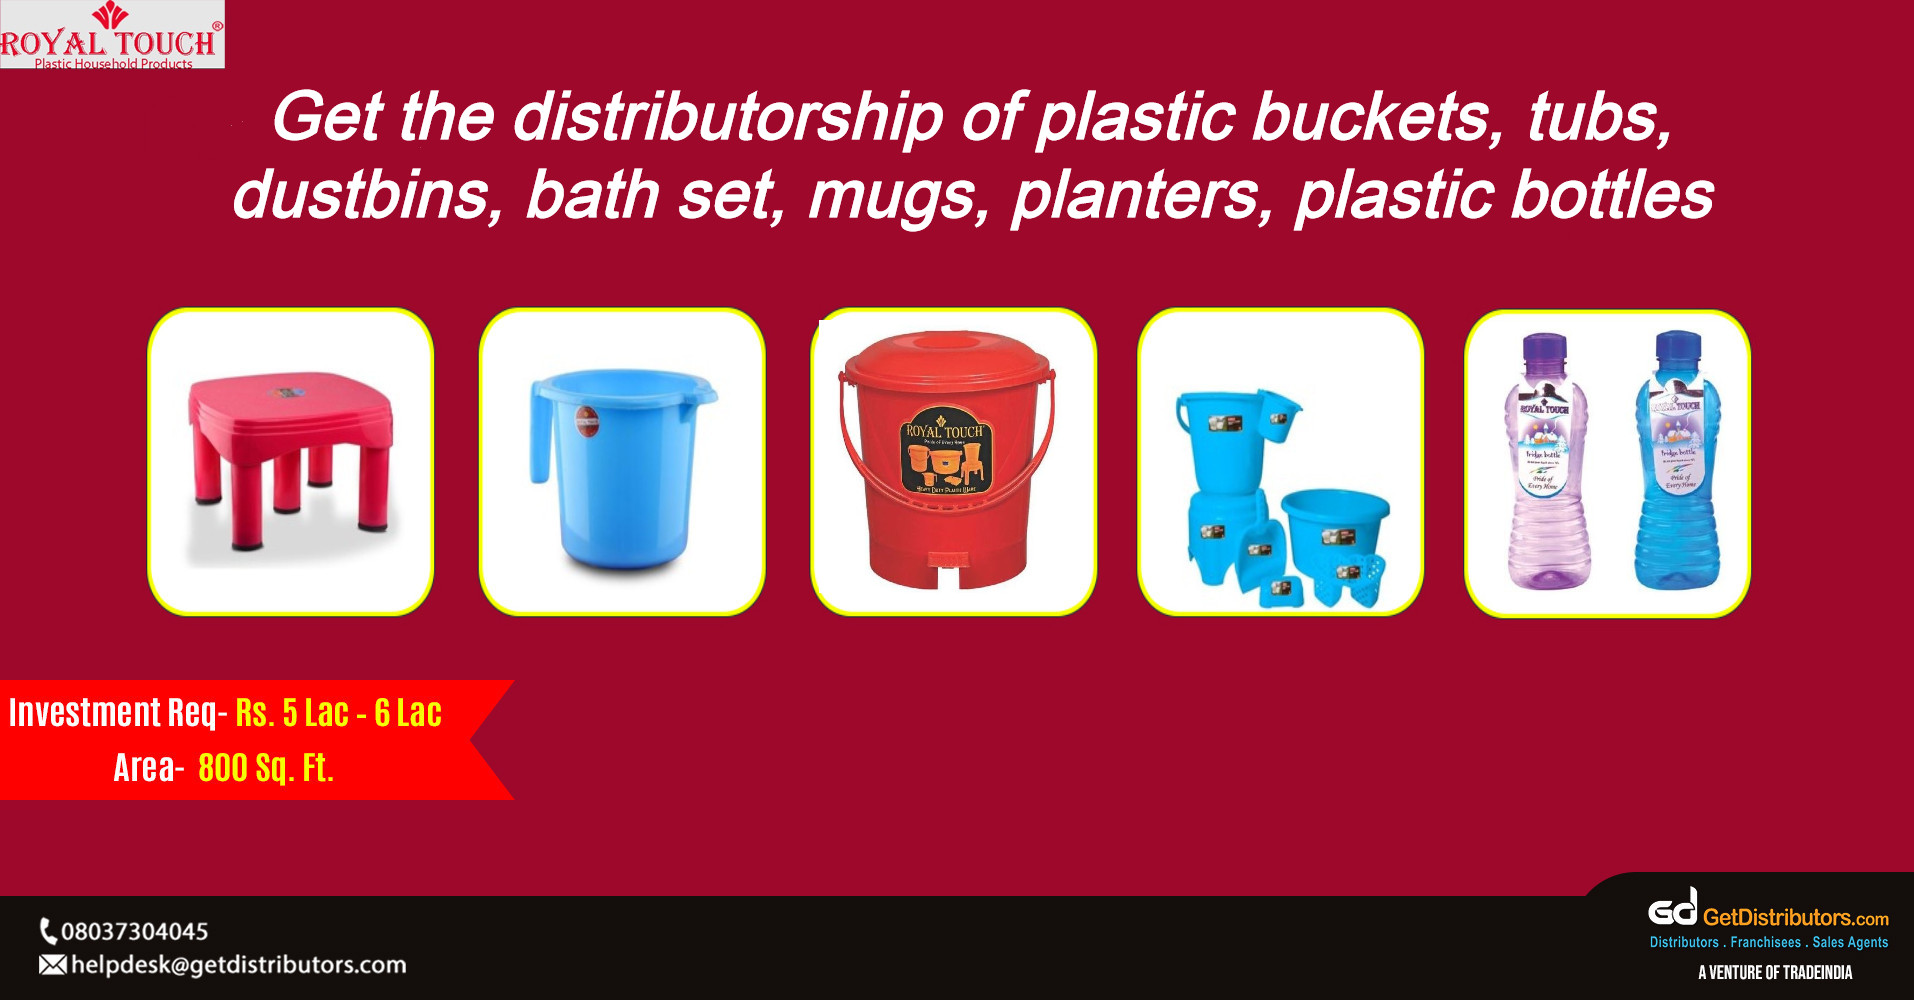 High-class buckets, tubs, dustbins, and other products for distribution